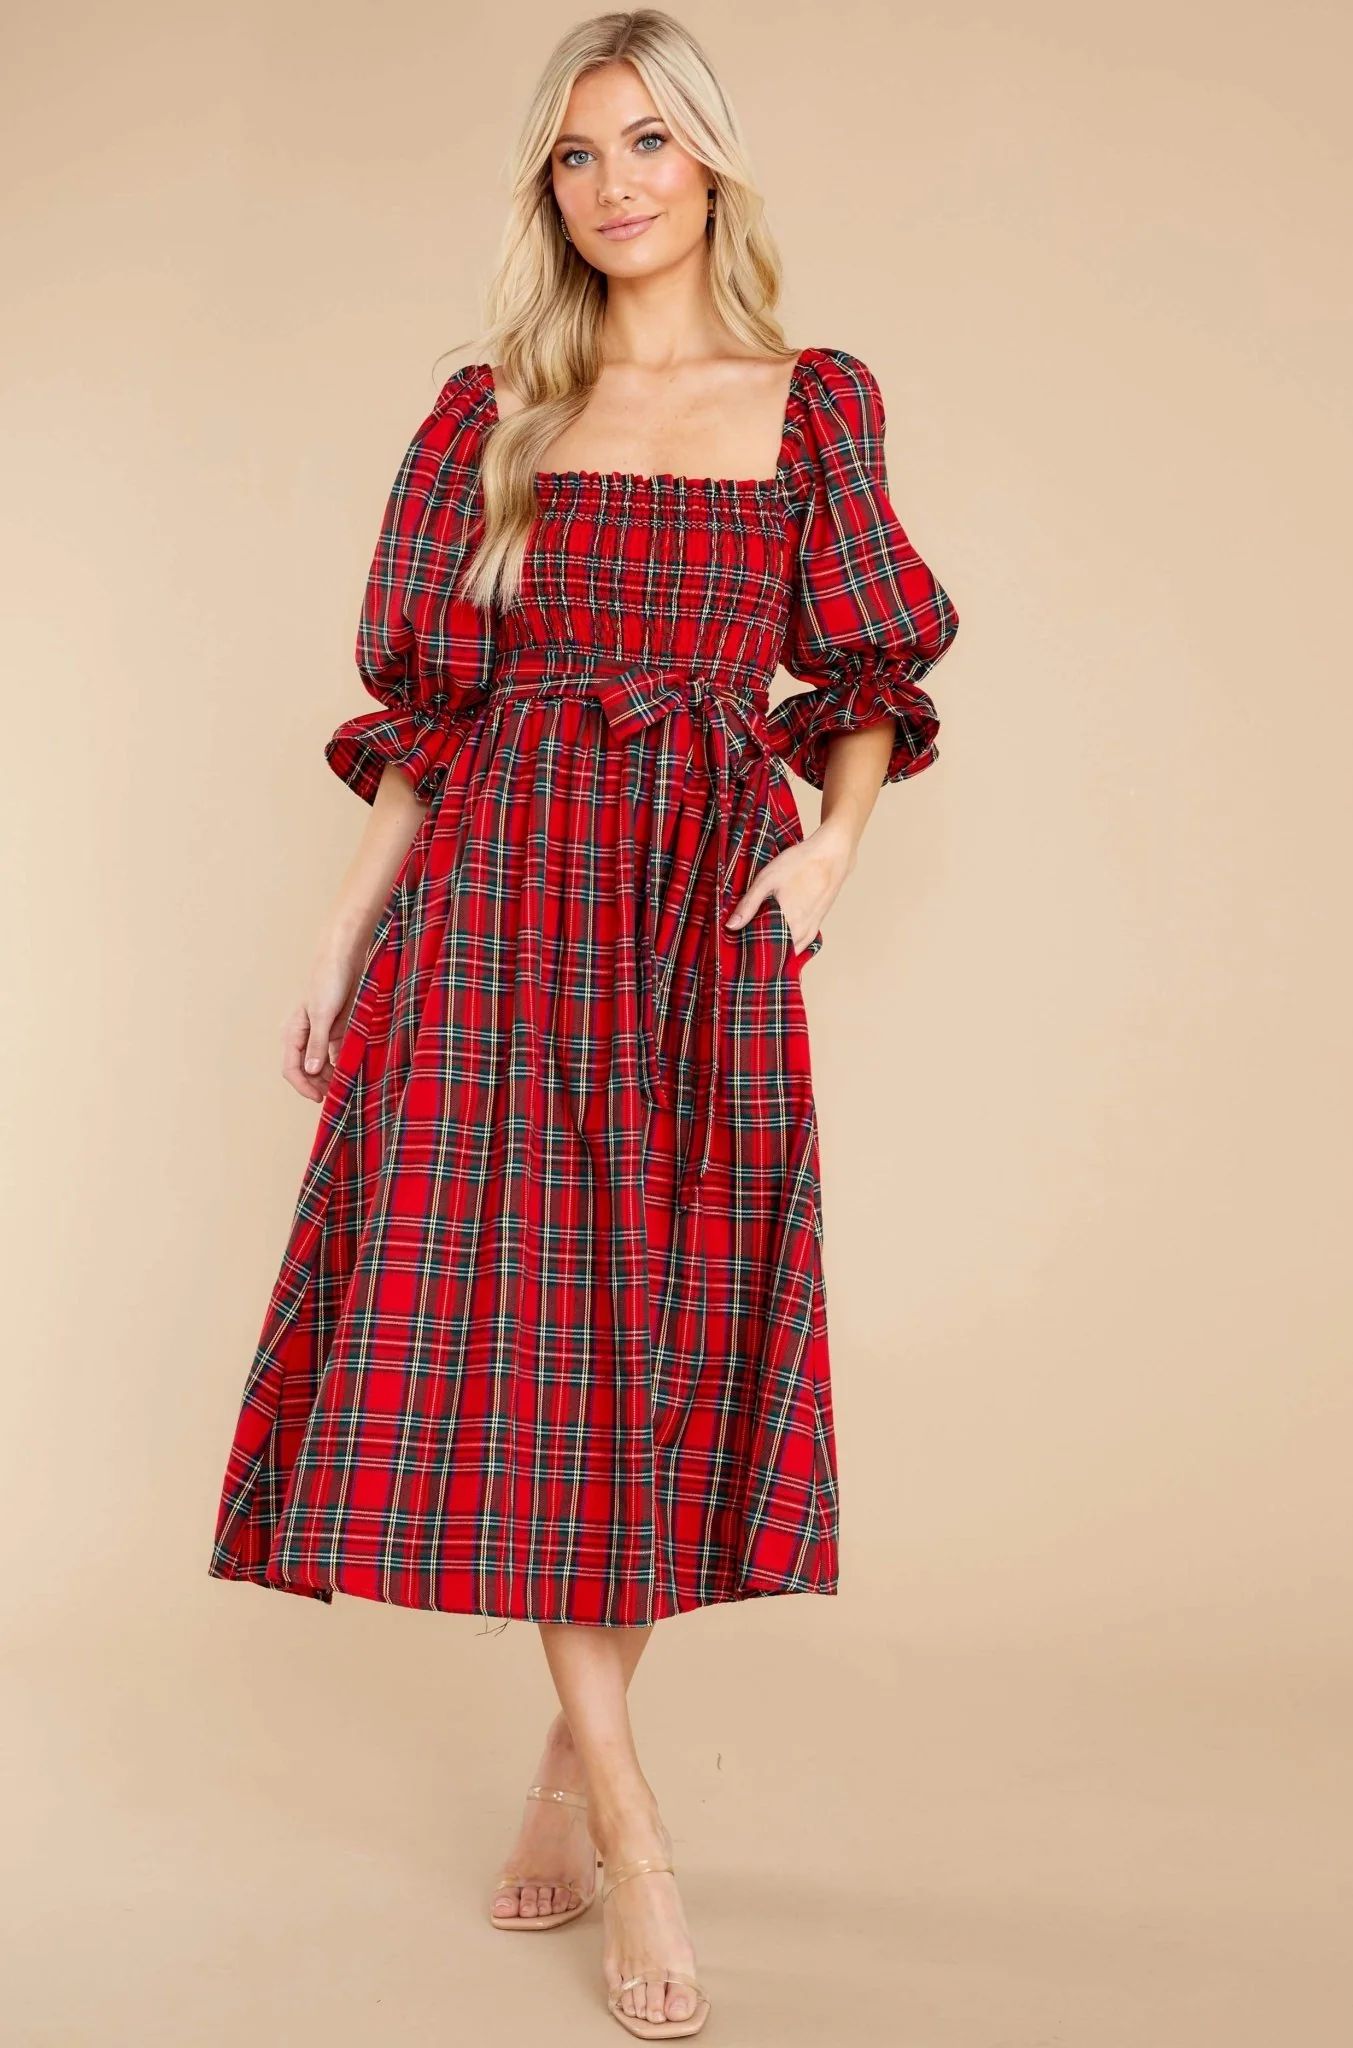 Everyday Cheer Red Plaid Maxi Dress | Red Dress 